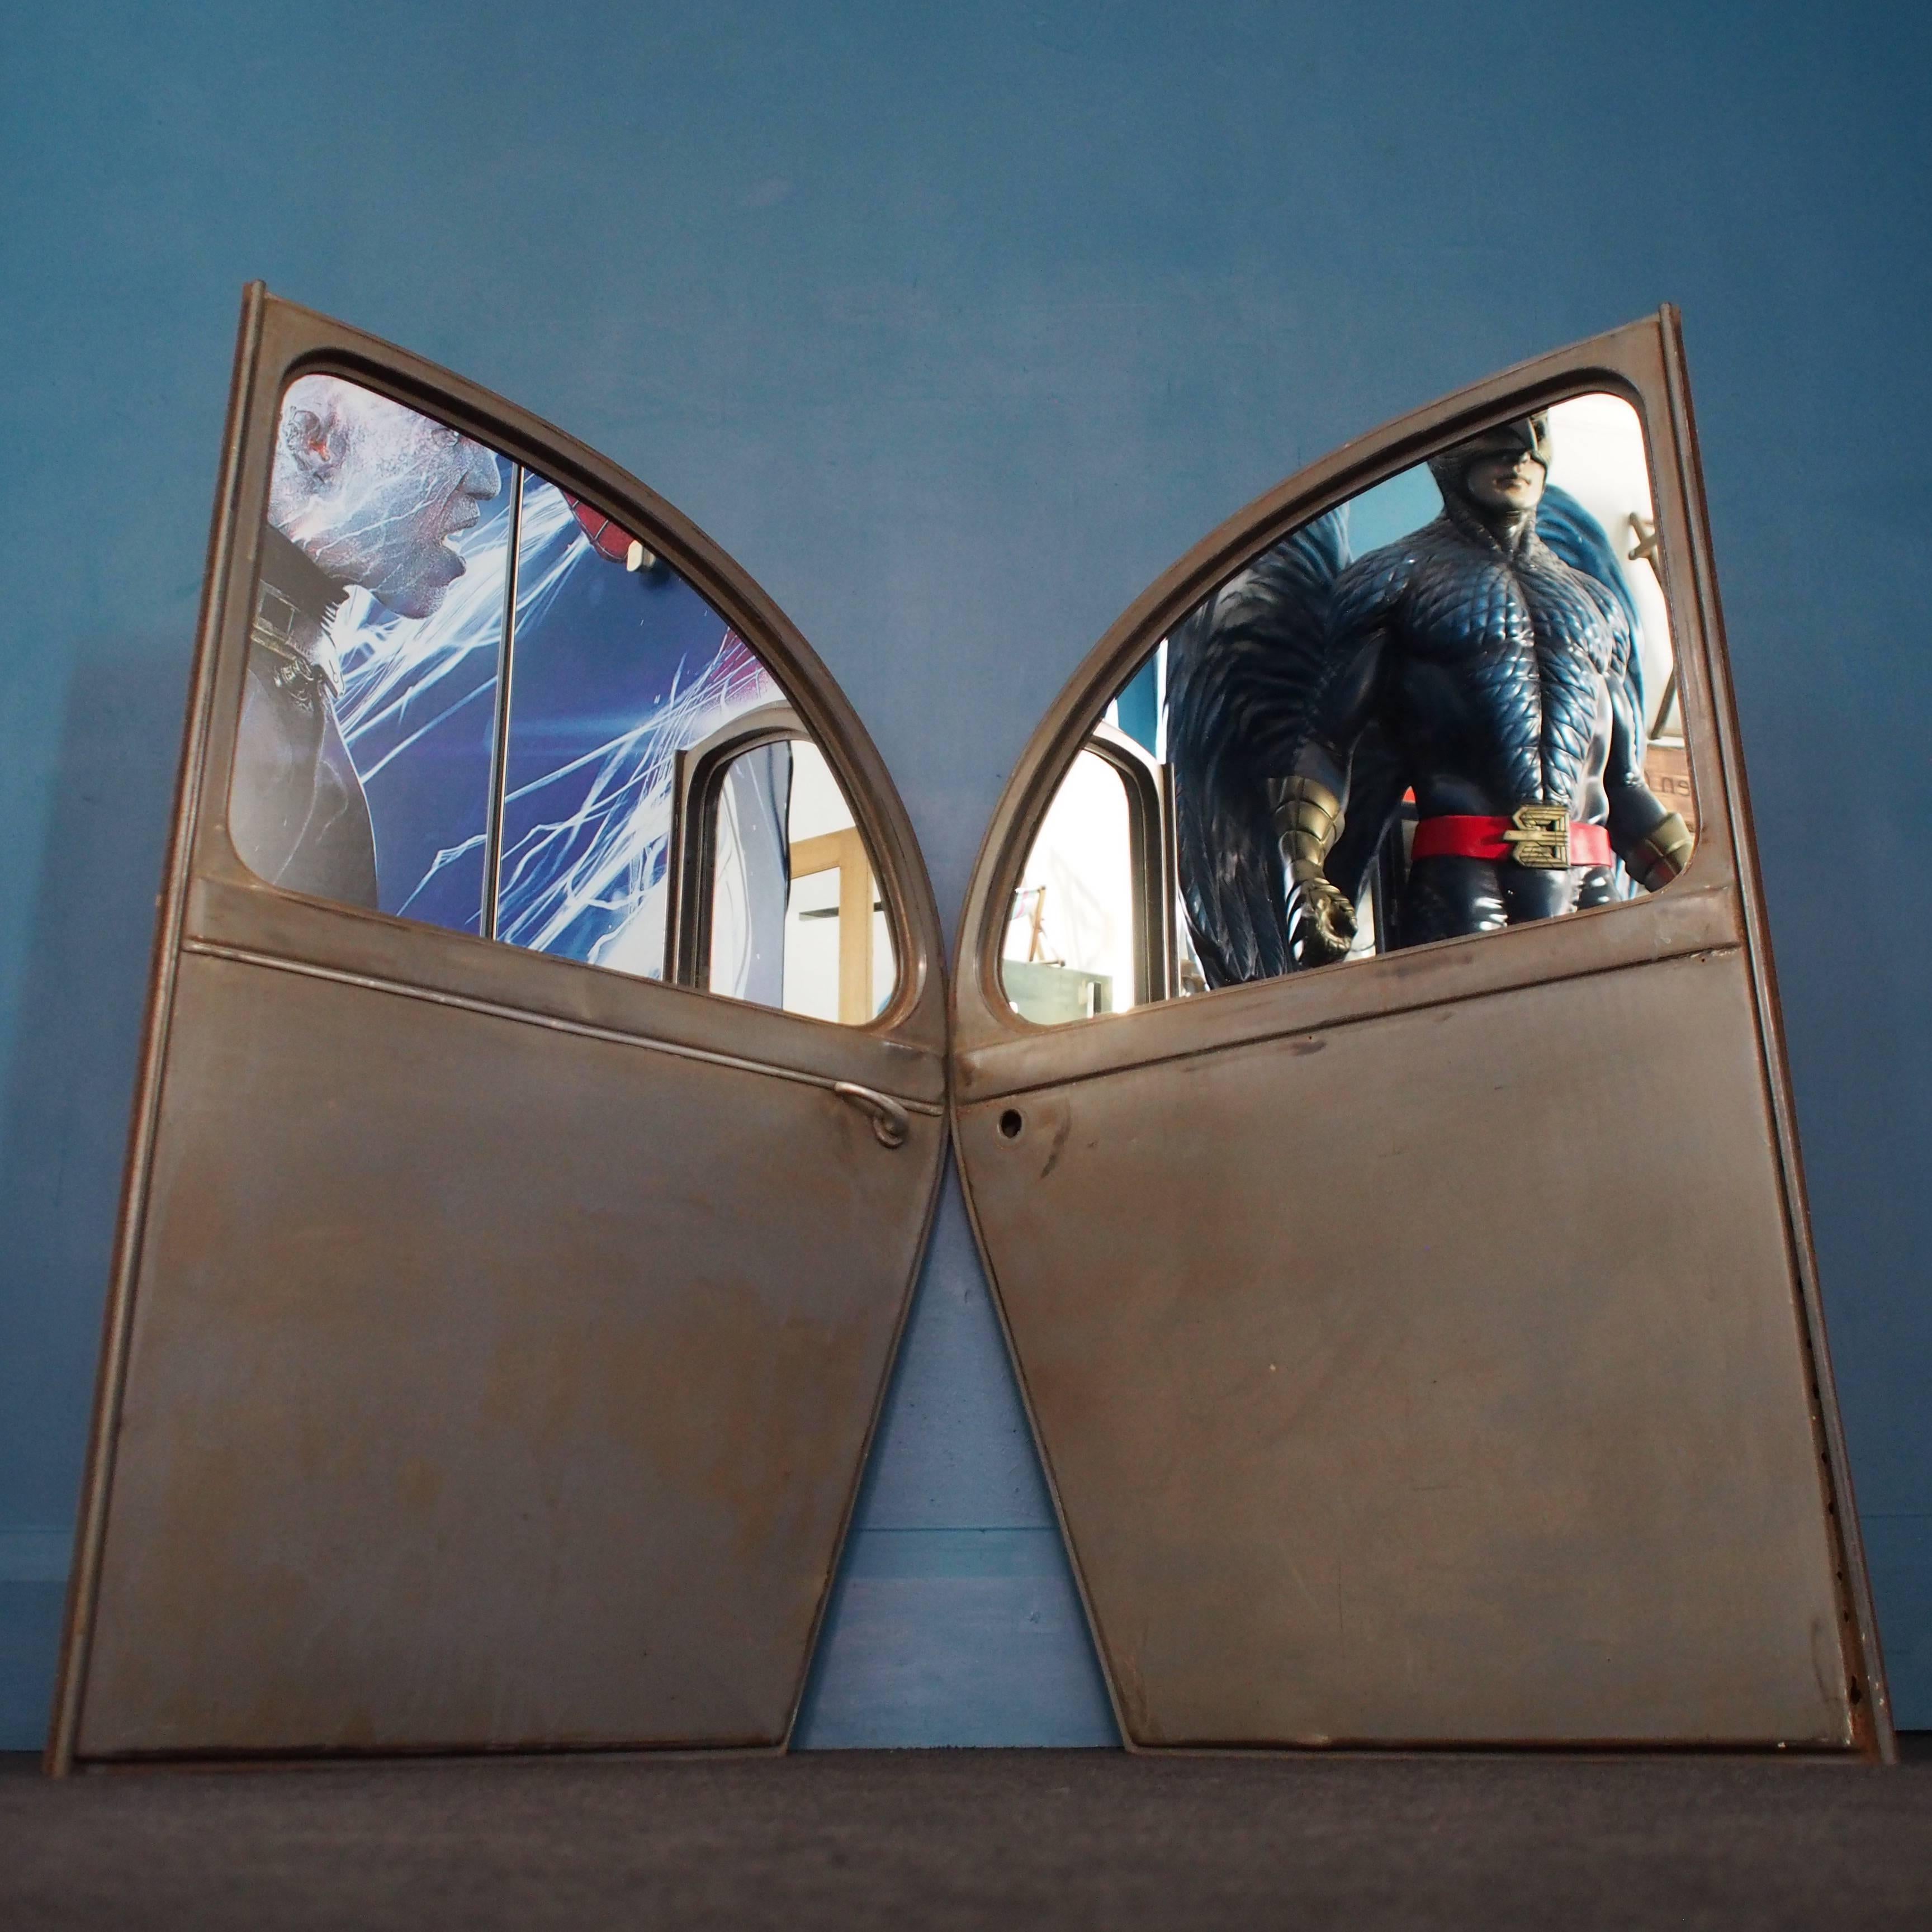 A pair of vintage French 2CV rear doors dating back to the 1940s have been creatively and sympathetically transformed into quirky industrial vintage mirrors. The doors retain their original outer French Grey paintwork and have some surface marks and